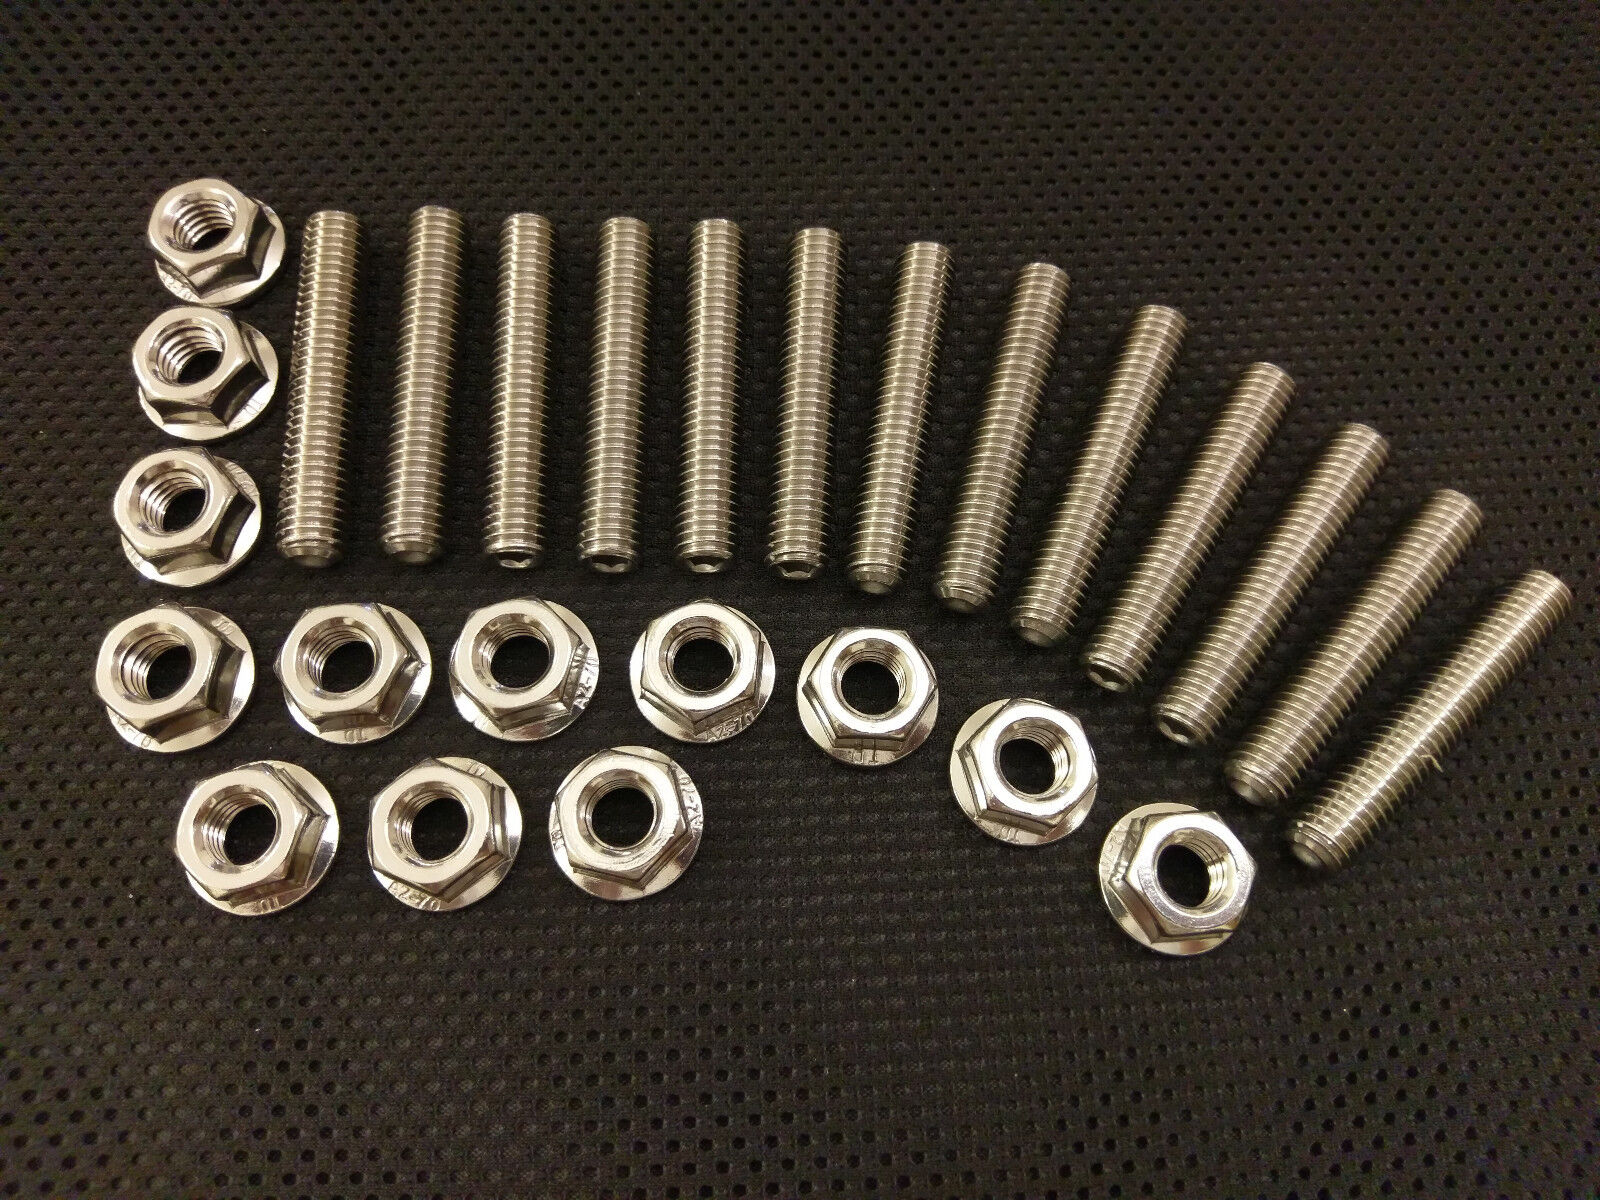 Seat Leon 1.8T 20V Stainless Exhaust Studs and Flange Nuts 99-05